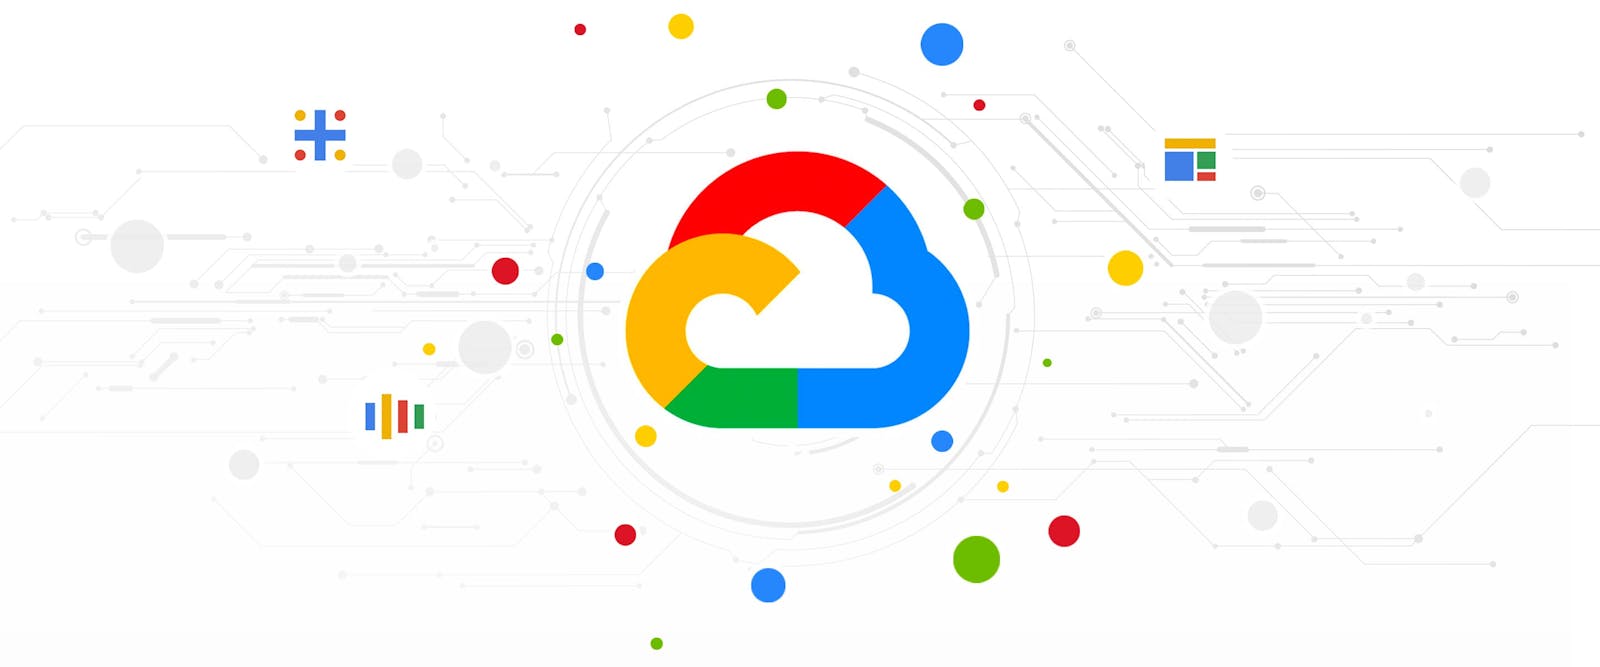 How to set up alert metrics on GCP for disk utilization?